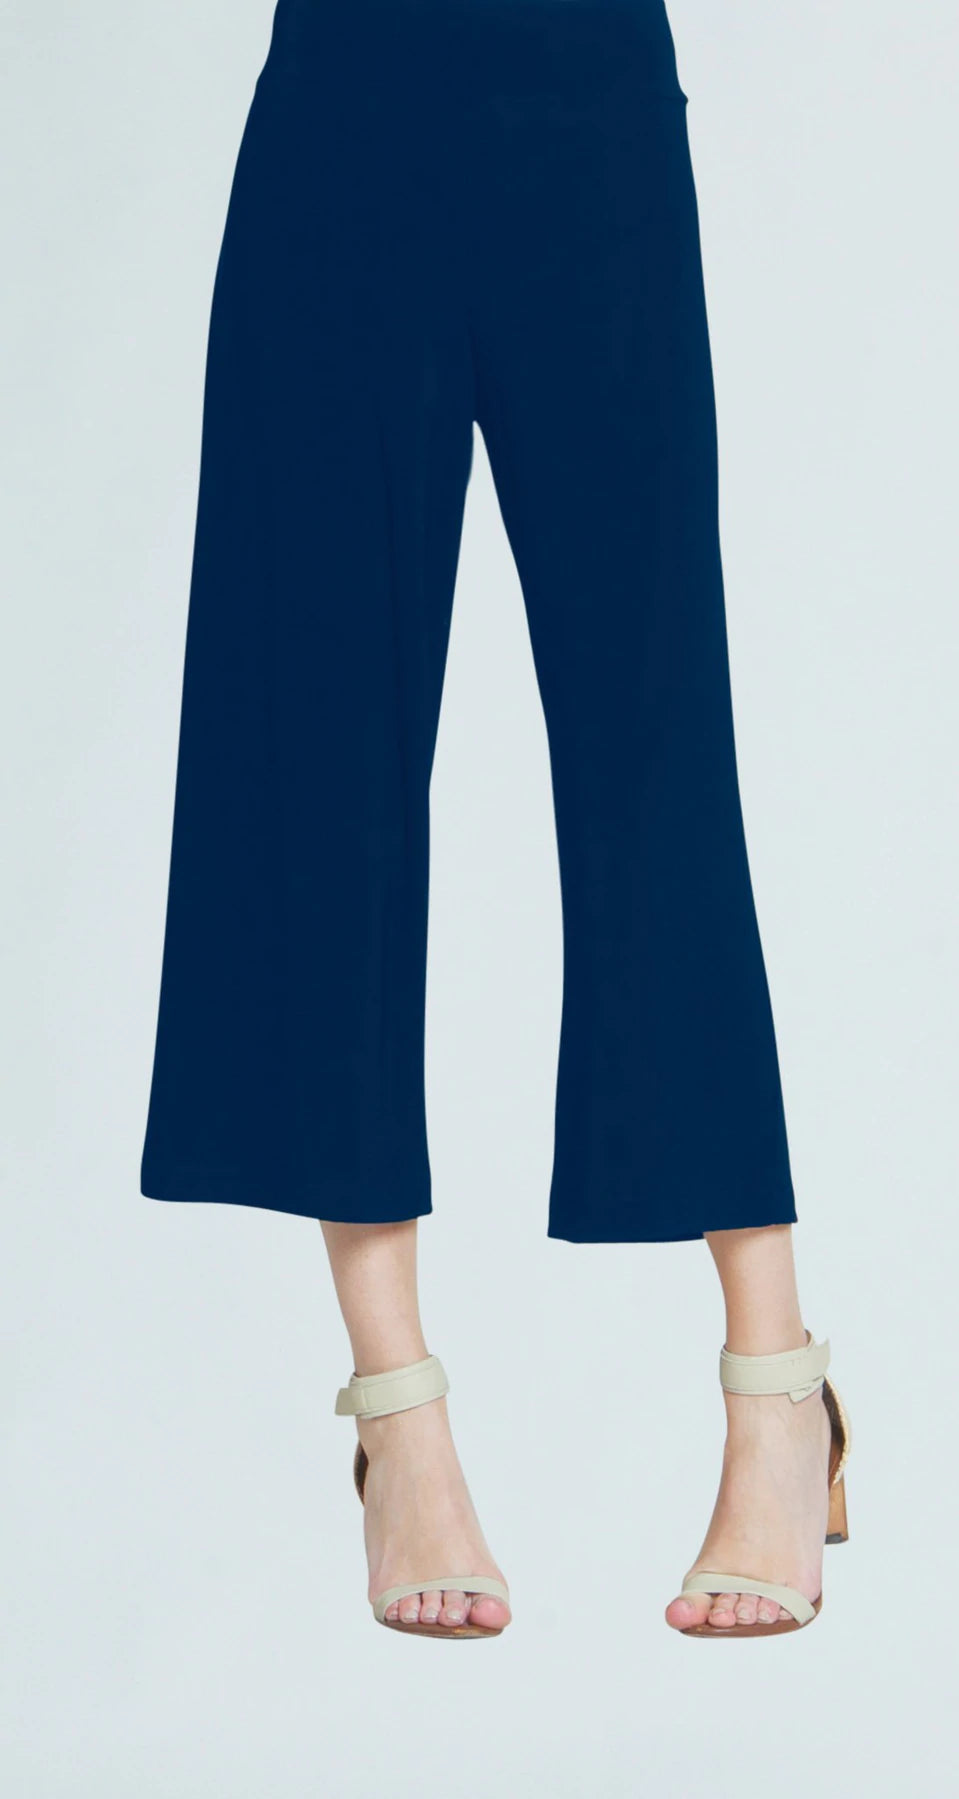 Color navy Gaucho Pant. Modern Pull-On Gaucho Pant Clara Sunwoo soft knit gaucho pant features a flattering wide-leg cropped hem and 3” pull-on soft waistband, calf-length pants designed to naturally flow against the body. ﻿Made in USA.